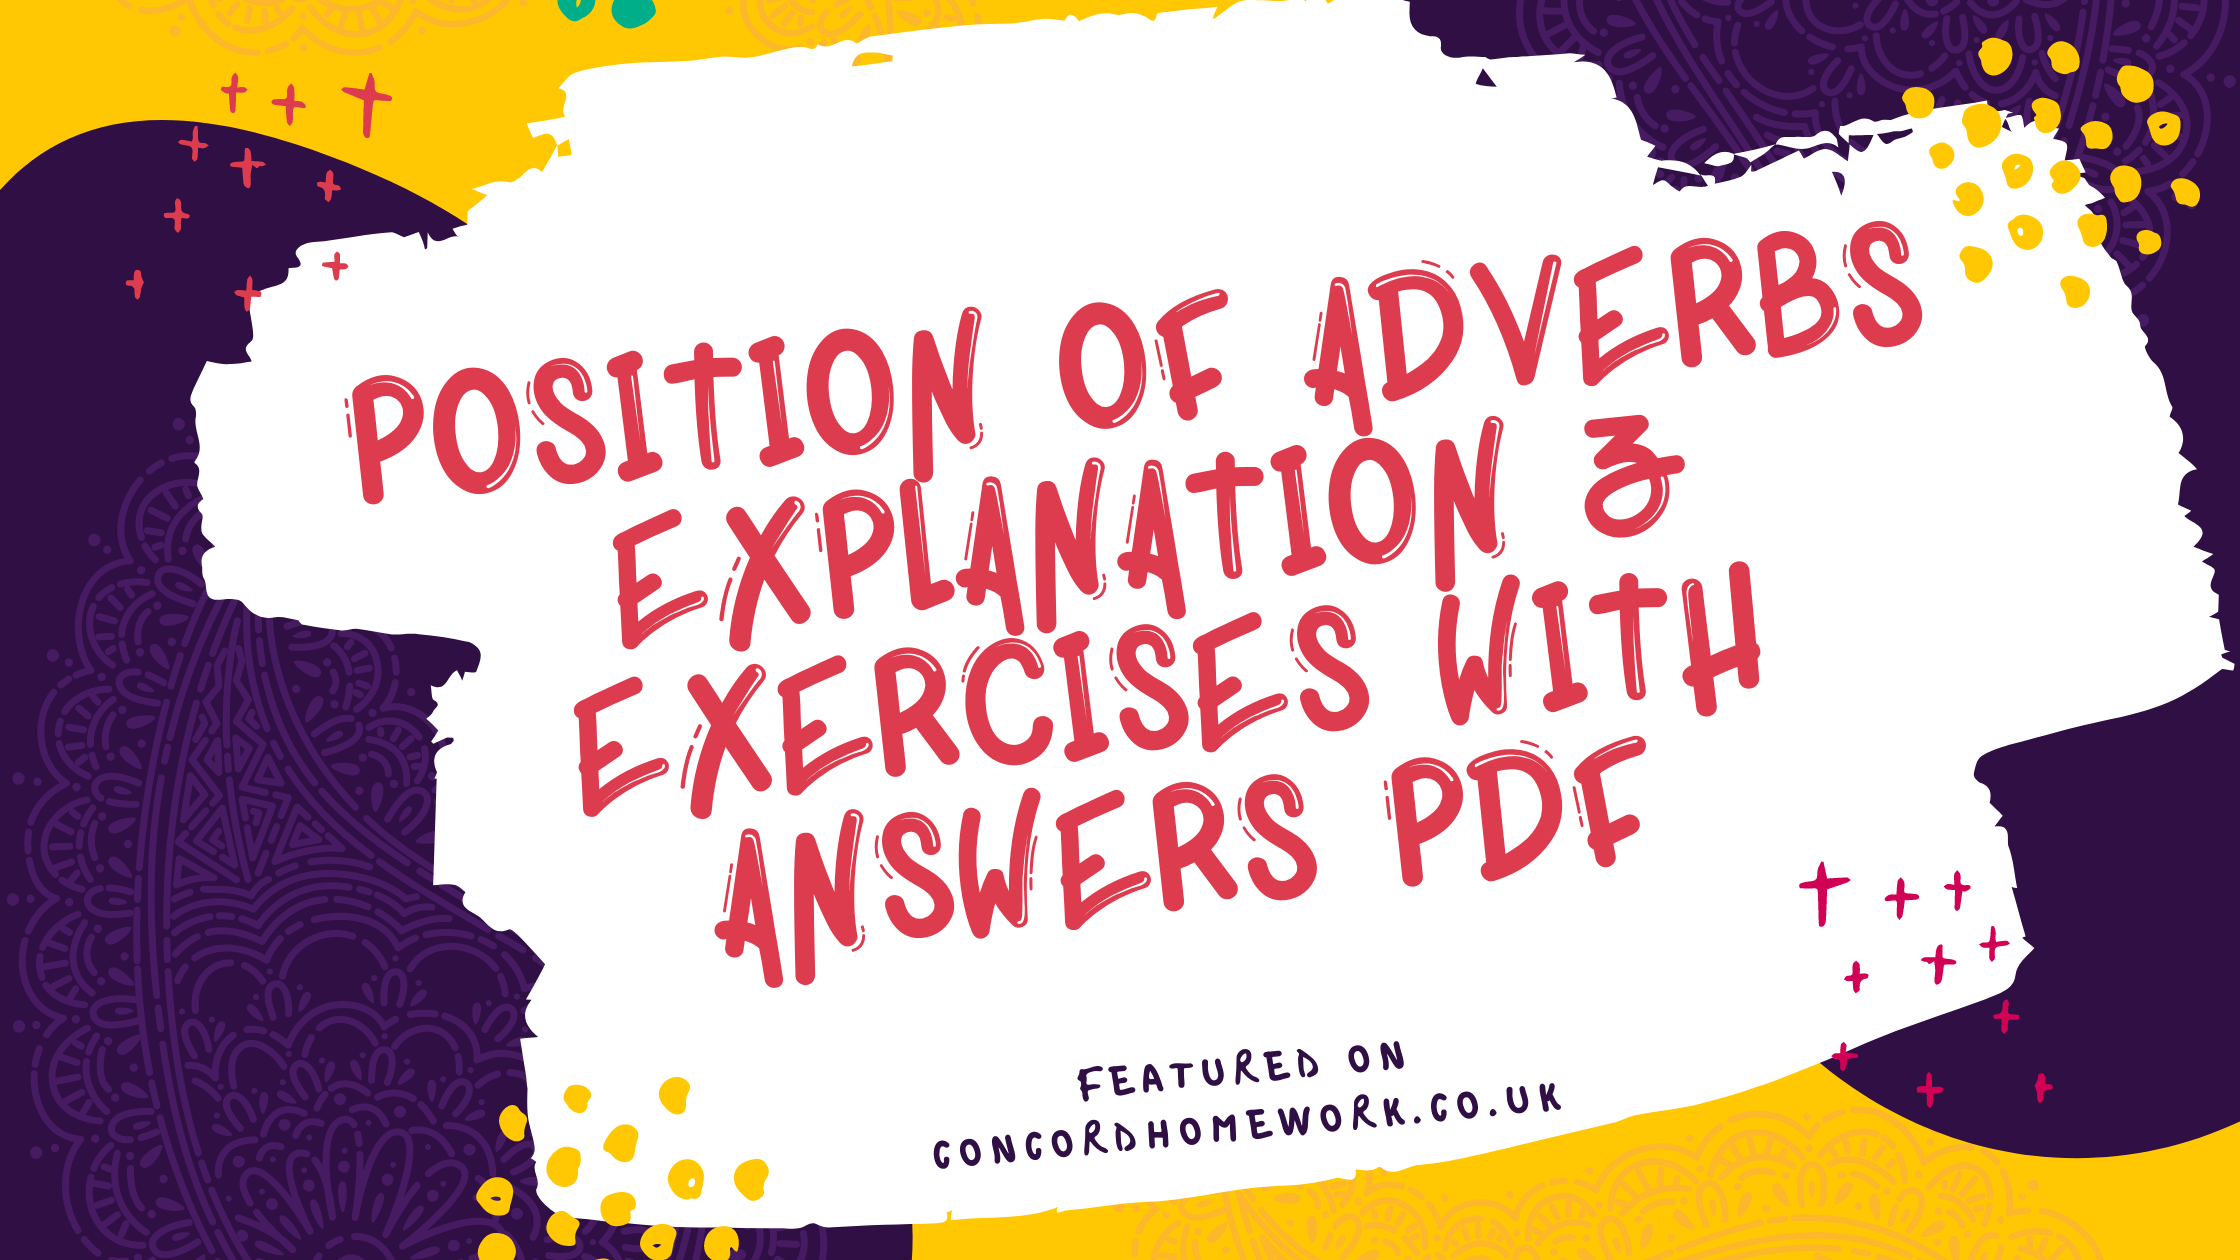 Position-of-adverbs-explanation-and-exercises-with-answers-pdf-1